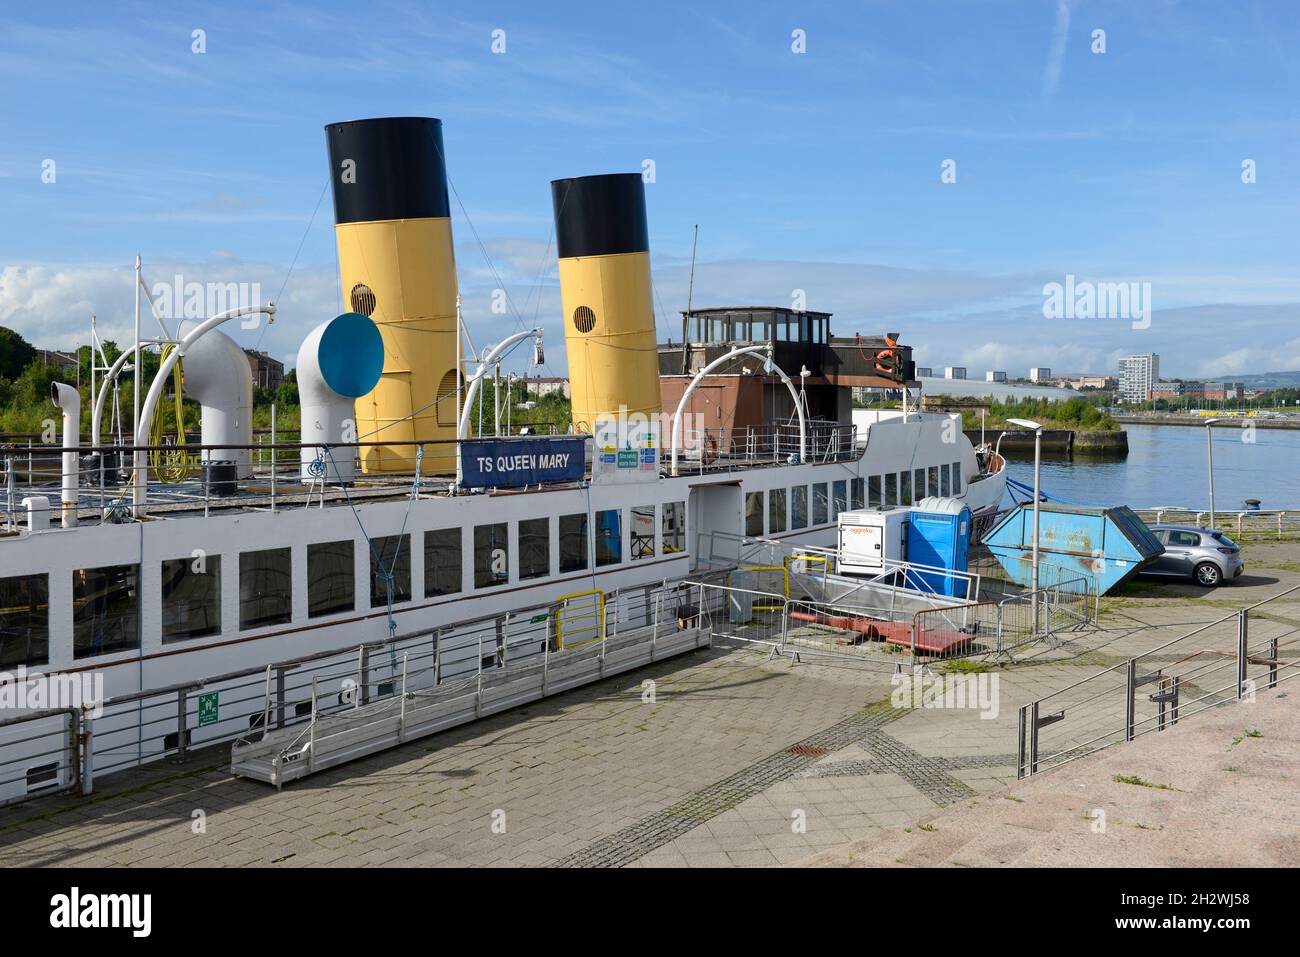 The TS Queen Mary berthed at Cessnock quay on the river Clyde in Glasgow, Scotland. Stock Photo